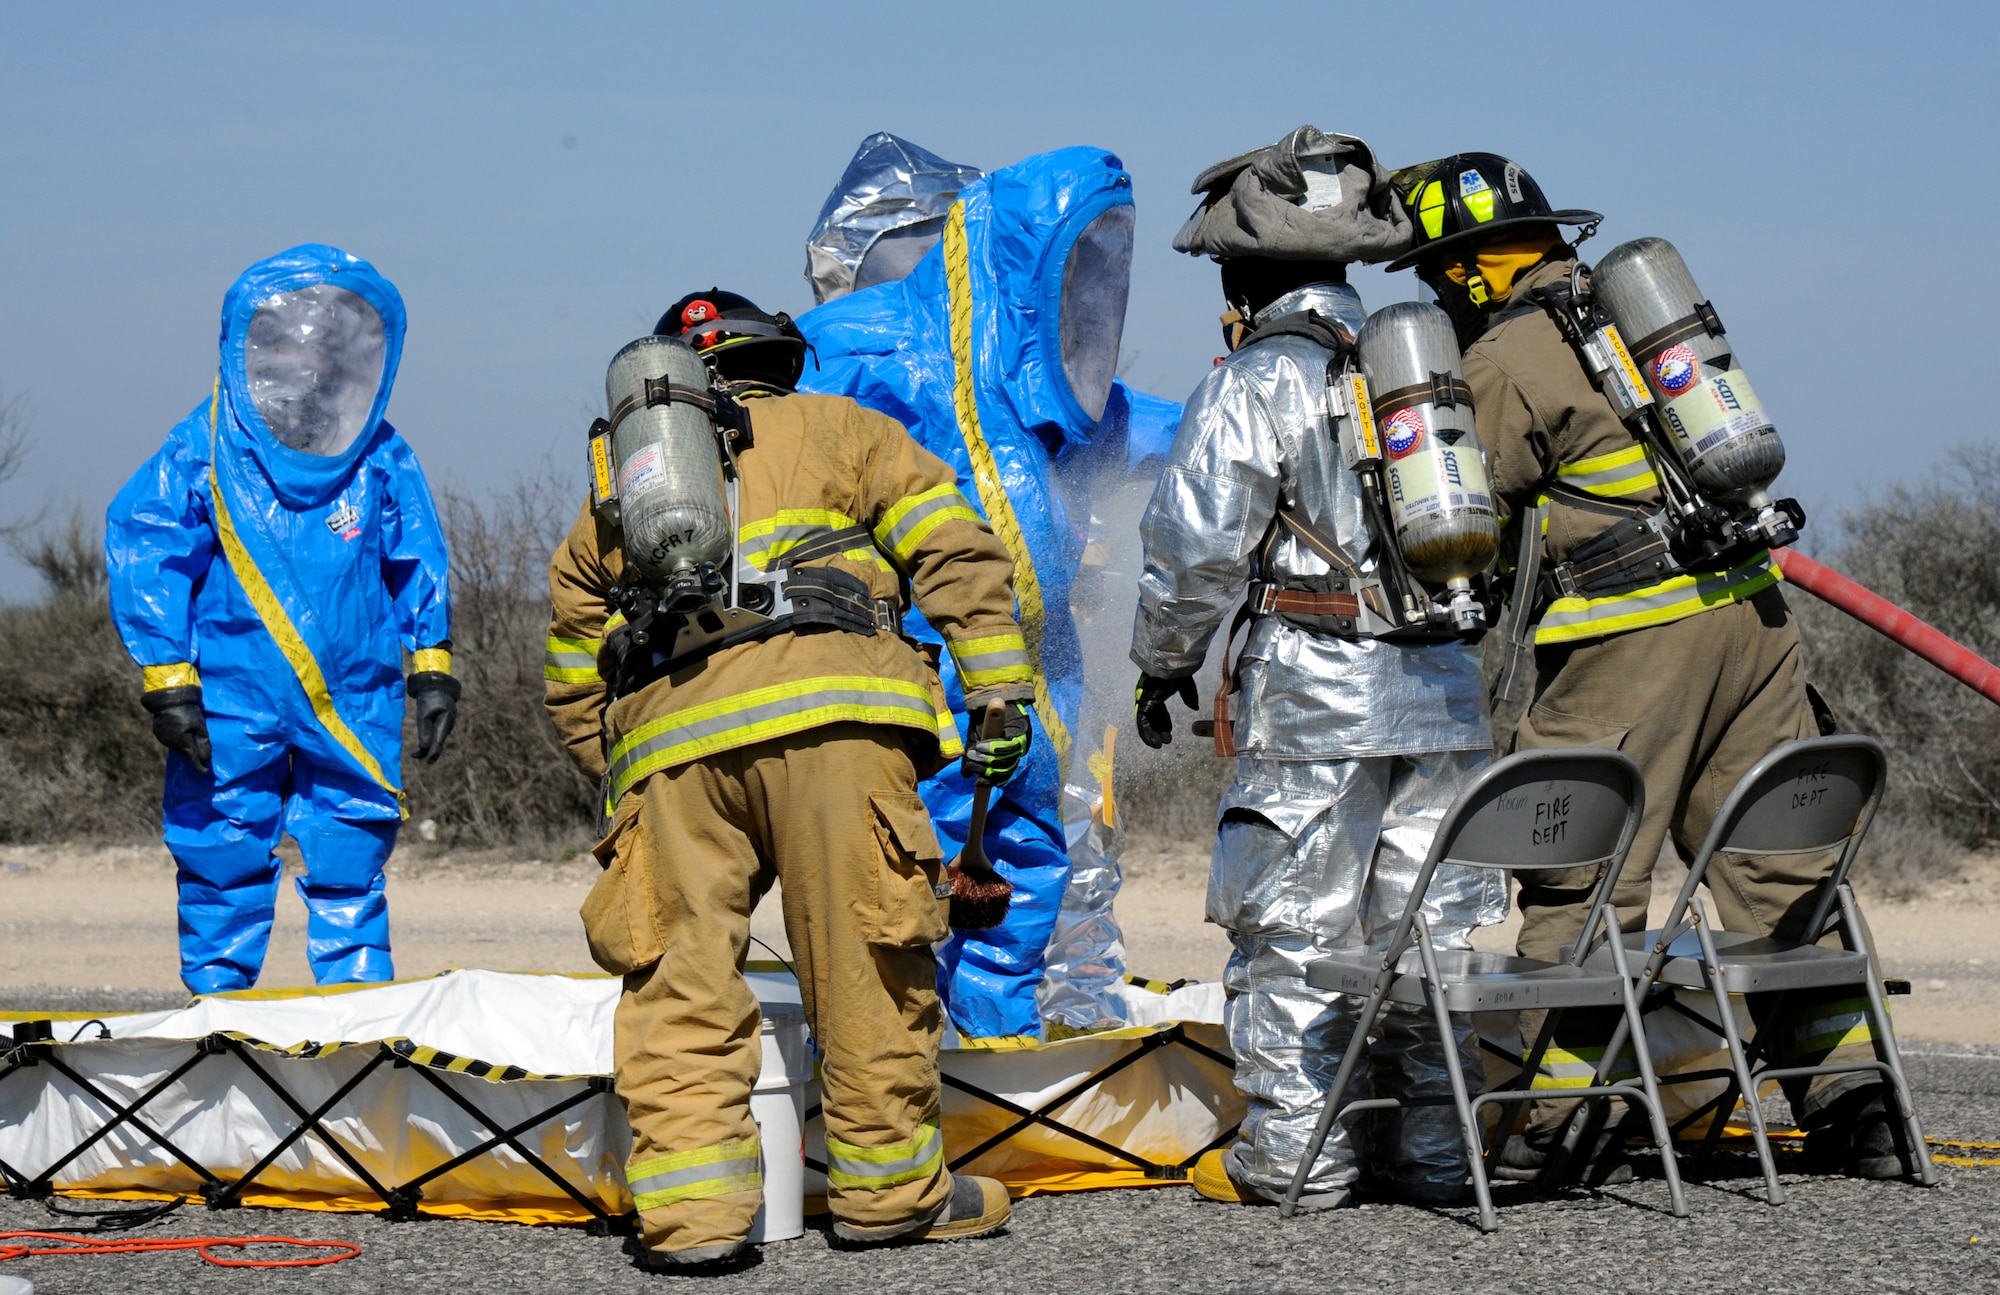 LAUGHLIN AIR FORCE BASE, Texas -- Kinney County and Laughlin firefighters decontaminate Laughlin's hazardous material responders after they completed a sweep of the crash site 11 miles east of Laughlin Feb. 7. Laughlin first responders led the initial response to the 30-car train derailment by sending a HAZMAT team to ensure the crash site was free of potentially hazardous material. (U.S. Air Force photo/Airman 1st Class Nathan L. Maysonet)